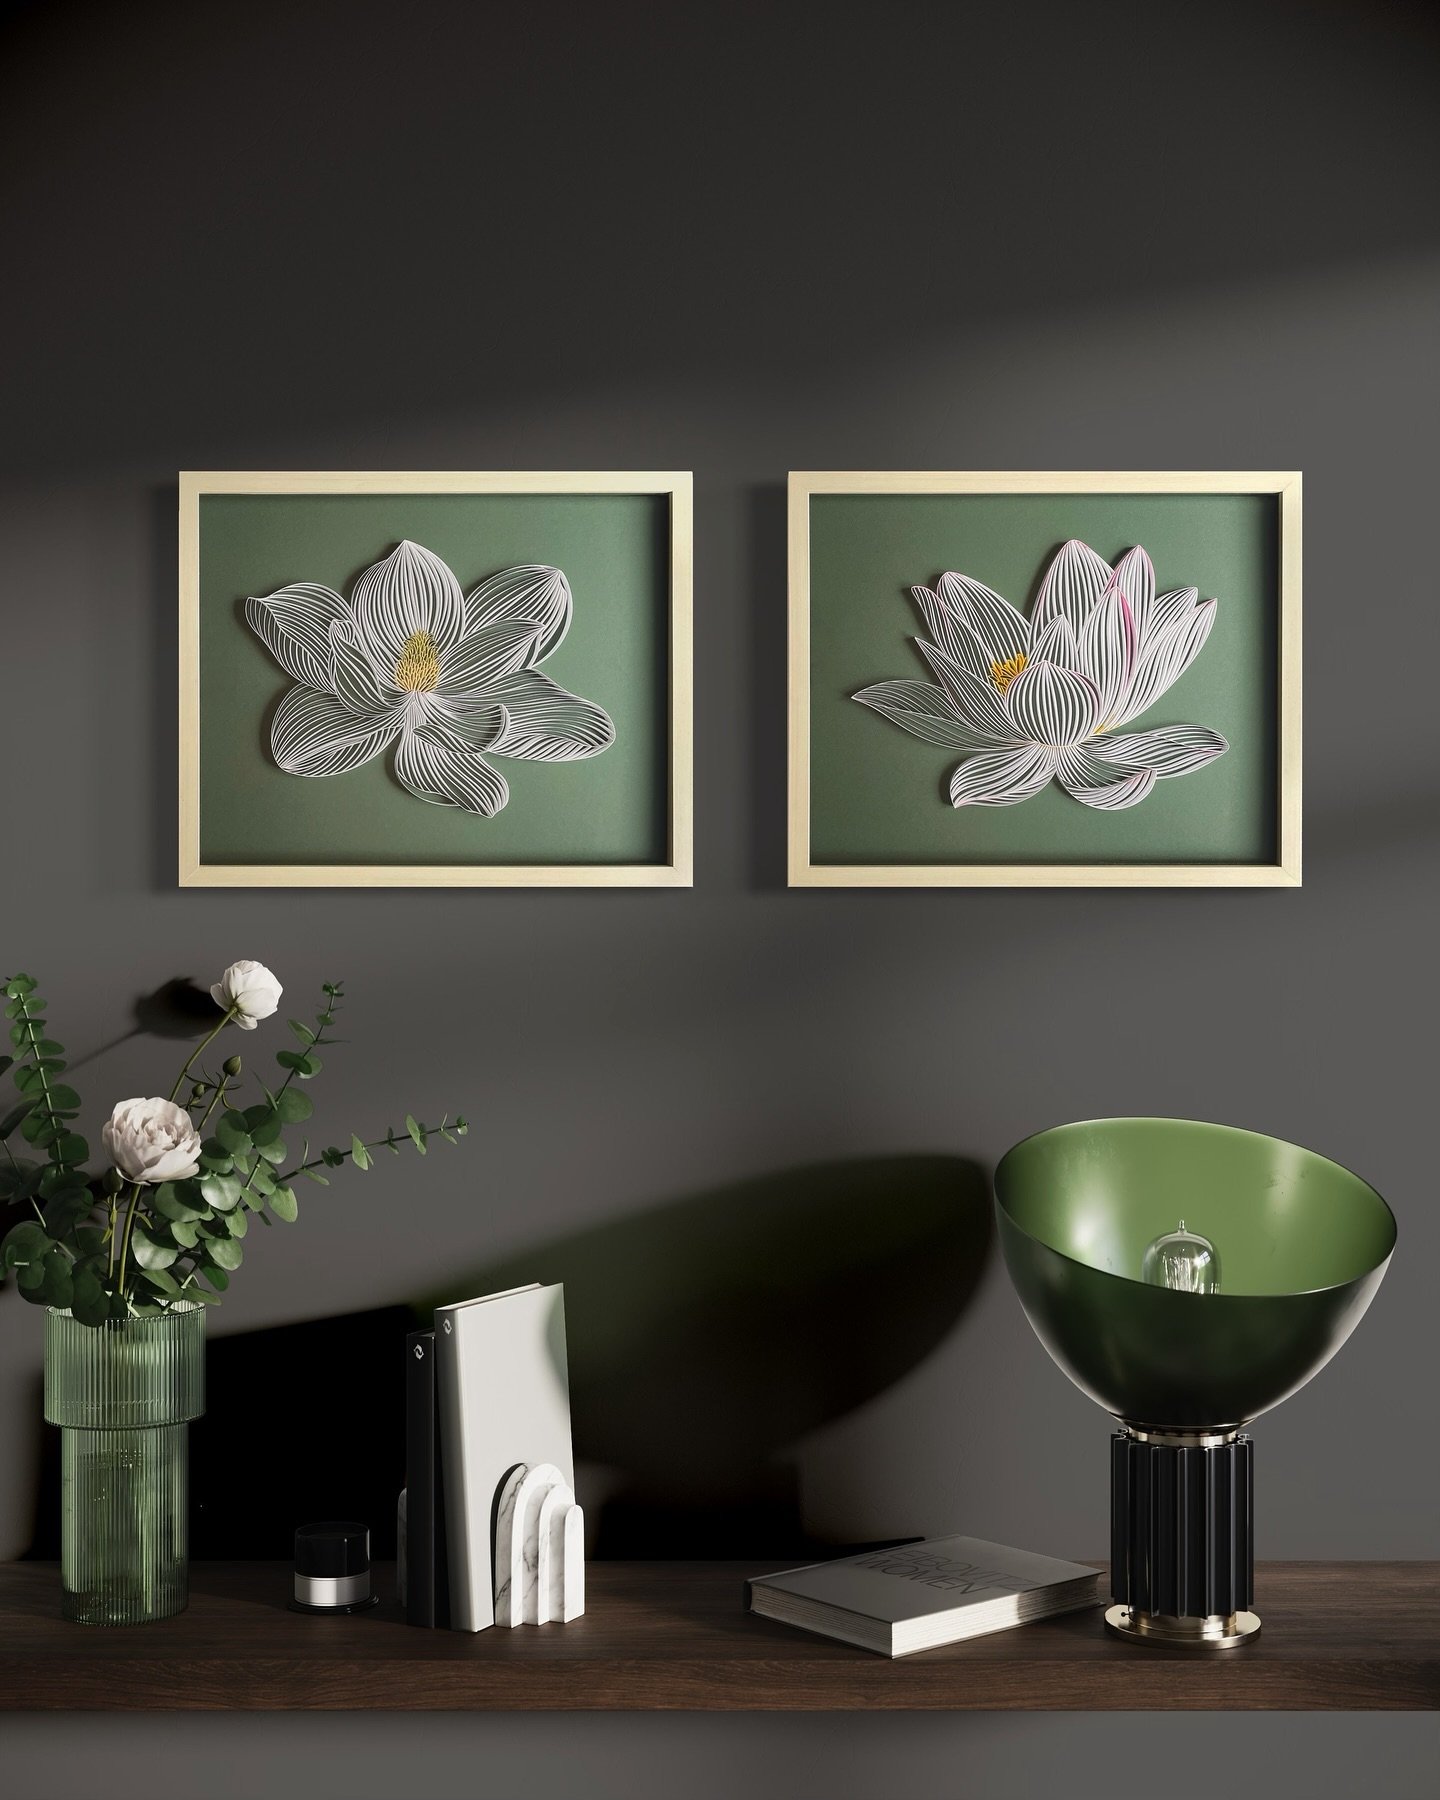 Available. DM for info.
Which is your favorite? 
WHITE MAGNOLIA or WHITE LOTUS 
21.25 x 17.25 in | 540 x 440 mm

#MadeFromPaper #JUDiTHandROLFE